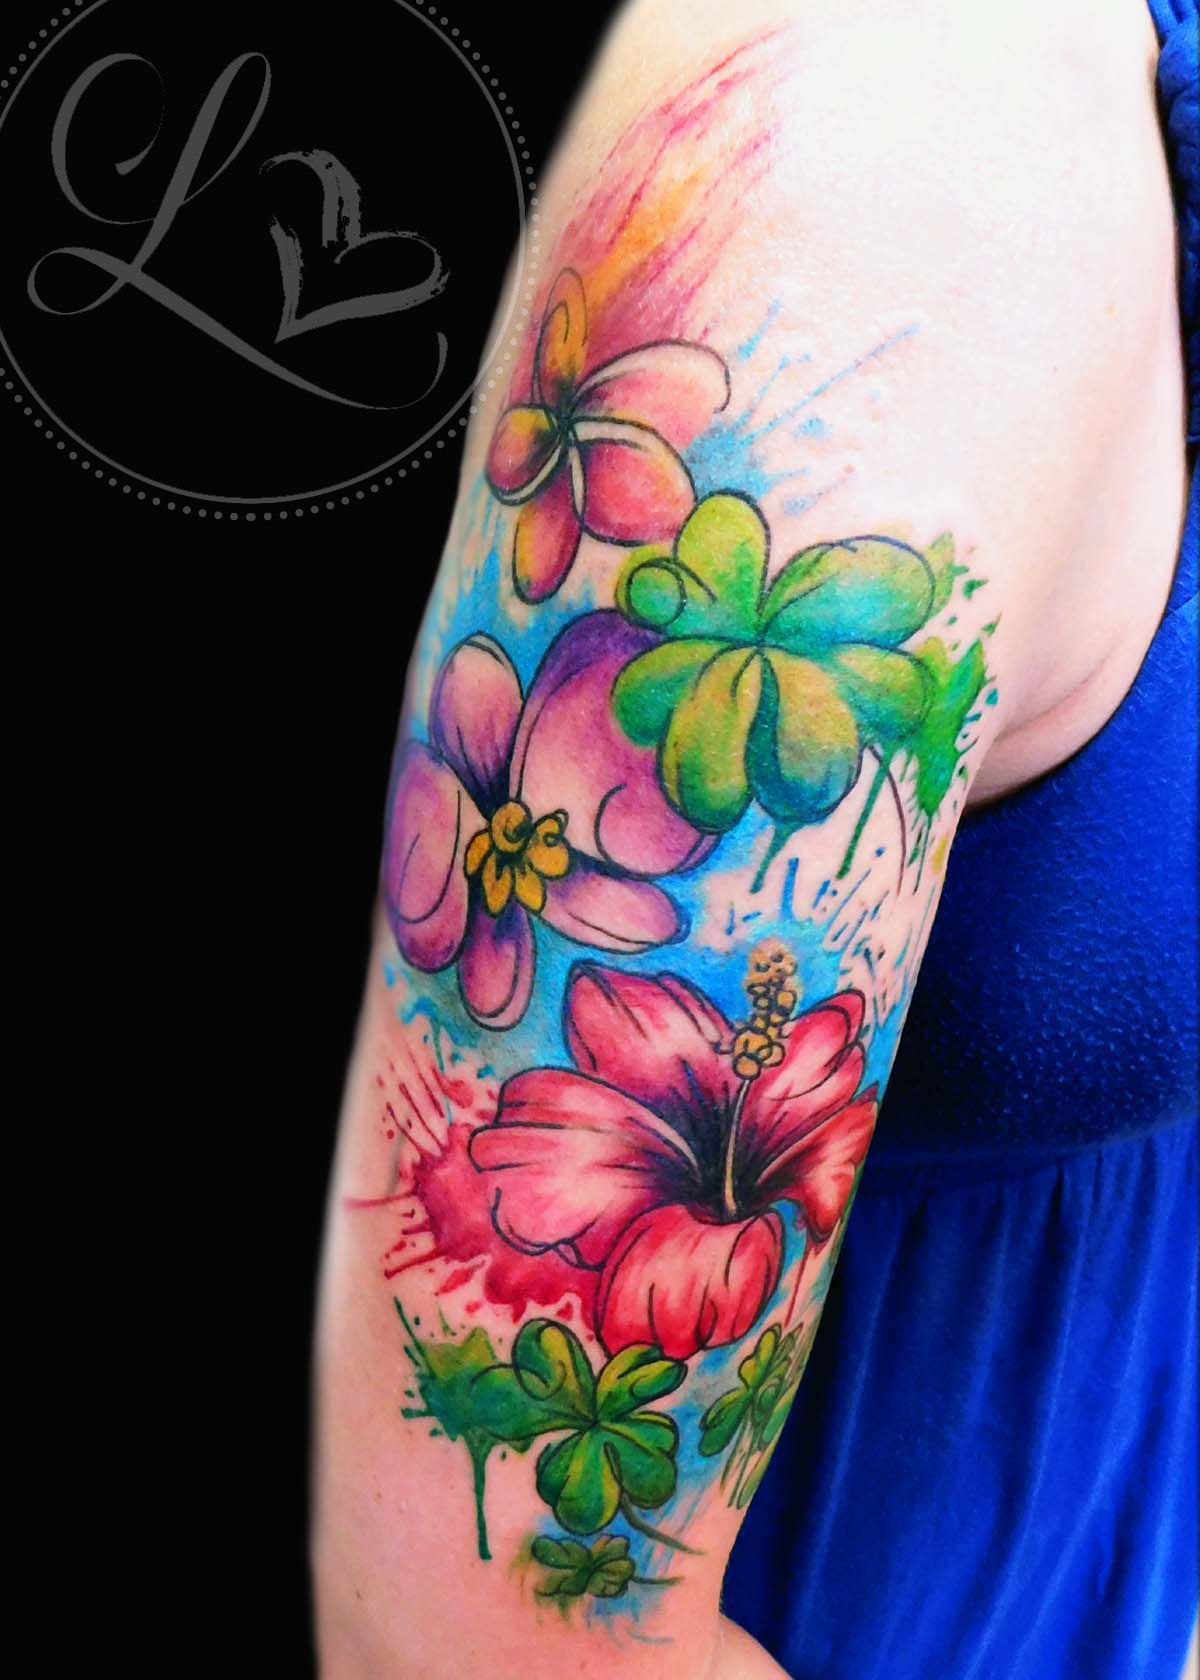 Watercolor floral half-sleeve tattoo composed of plumeria, hibiscus, orchid, and four-leaf clovers